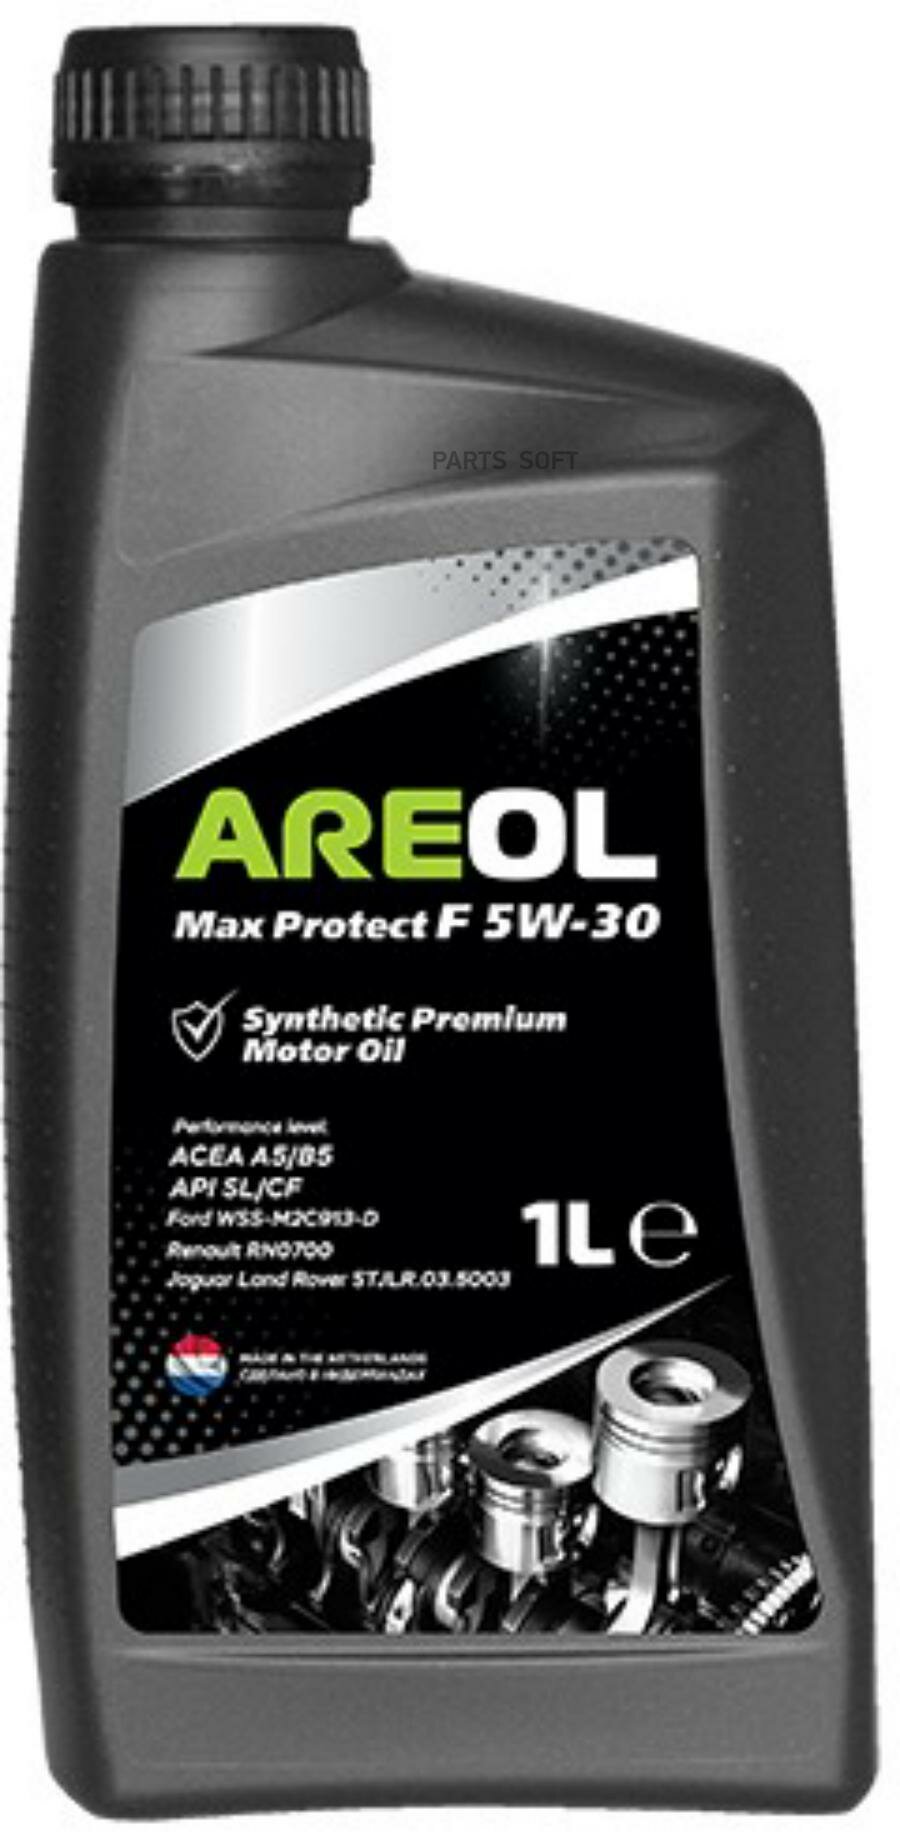 AREOL 5W30AR015 AREOL Max Protect F 5W-30 (1L)_масло моторное! синт.\ ACEA A5/B5, API SL/CF, FORD WSS-M2C913-D